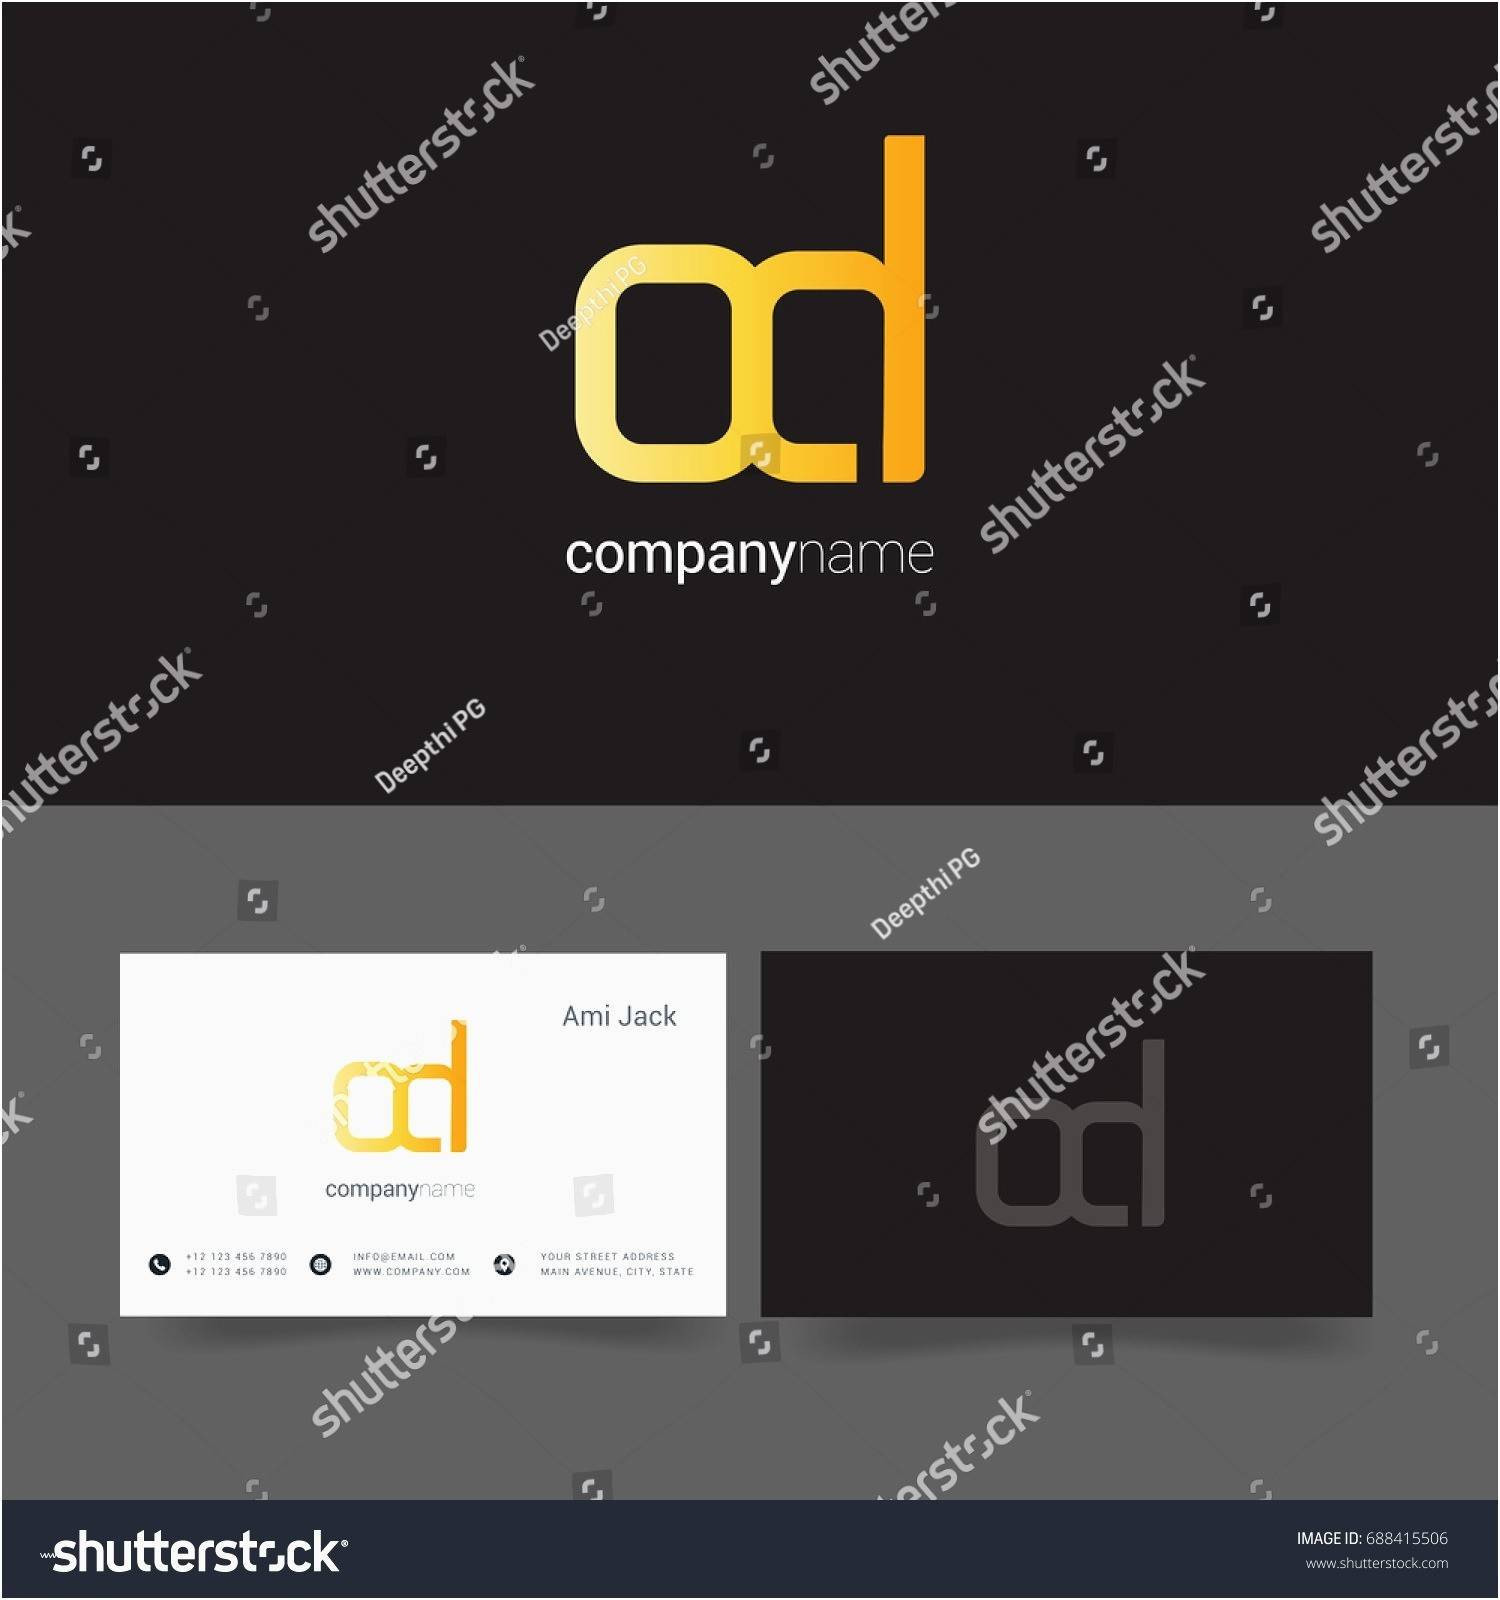 free templates business cards inspirational business cards template cyana of free templates business cards